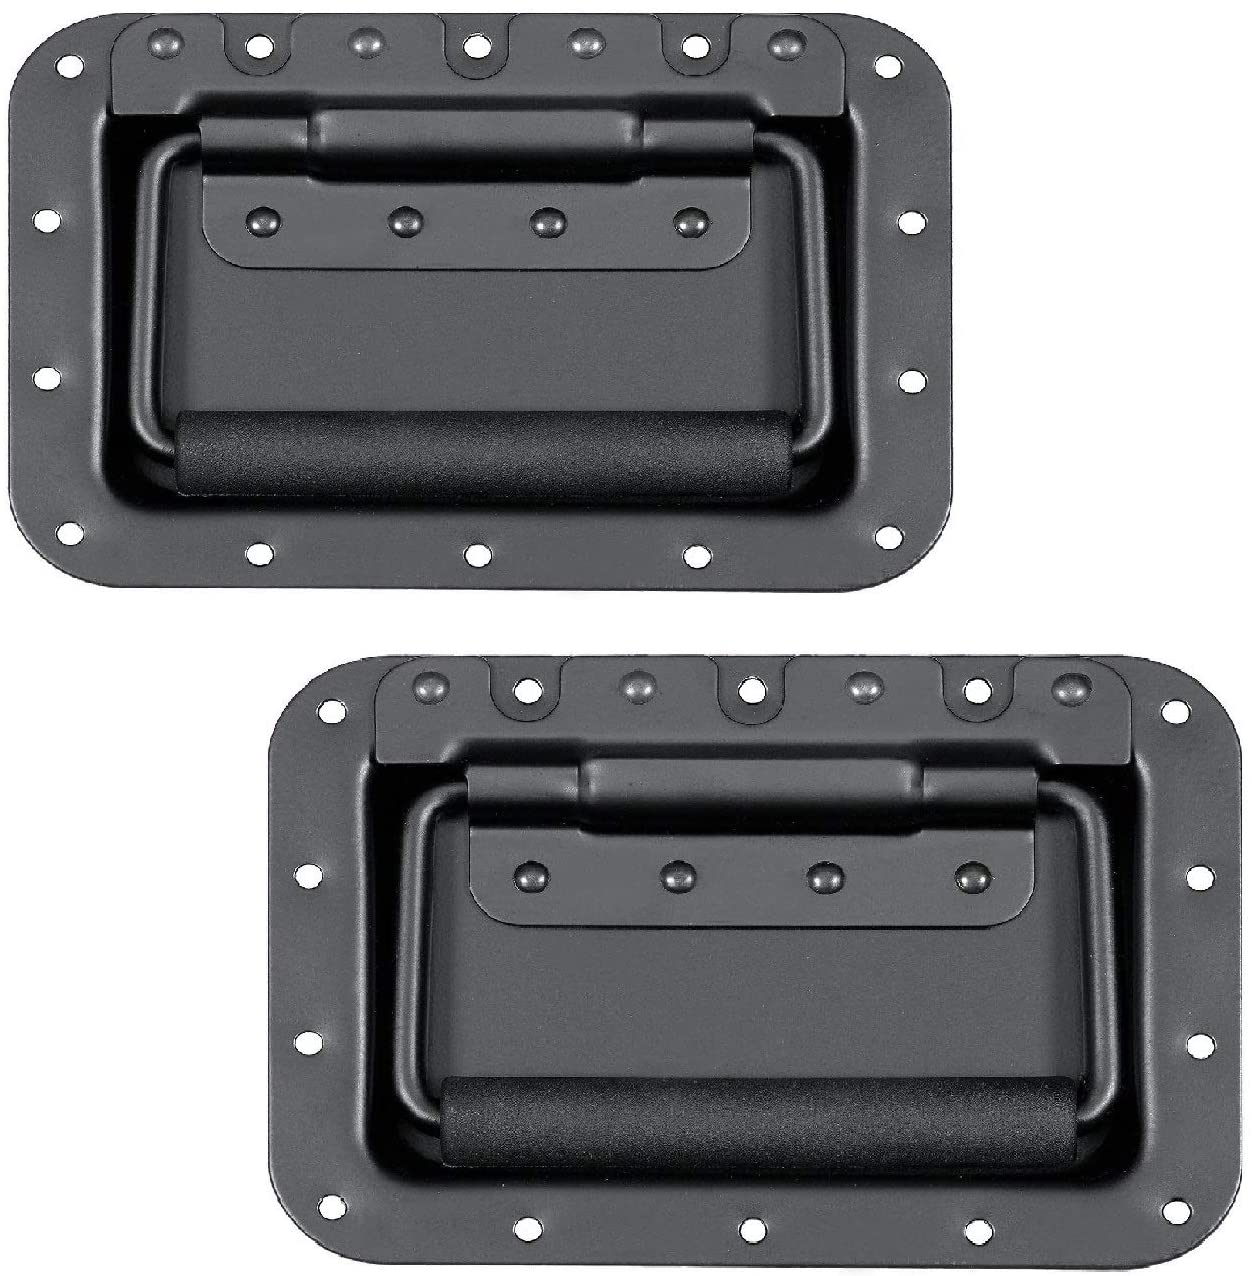 Absolute USA Set of 2 Spring Loaded Speaker Cabinet Handles 5.5 x 3.9 inches with Recessed Back - High Strength Black Metal Plate with Powerful Spring - Rubberized Holder to Reduce Hand Fatigue (1 Pair)